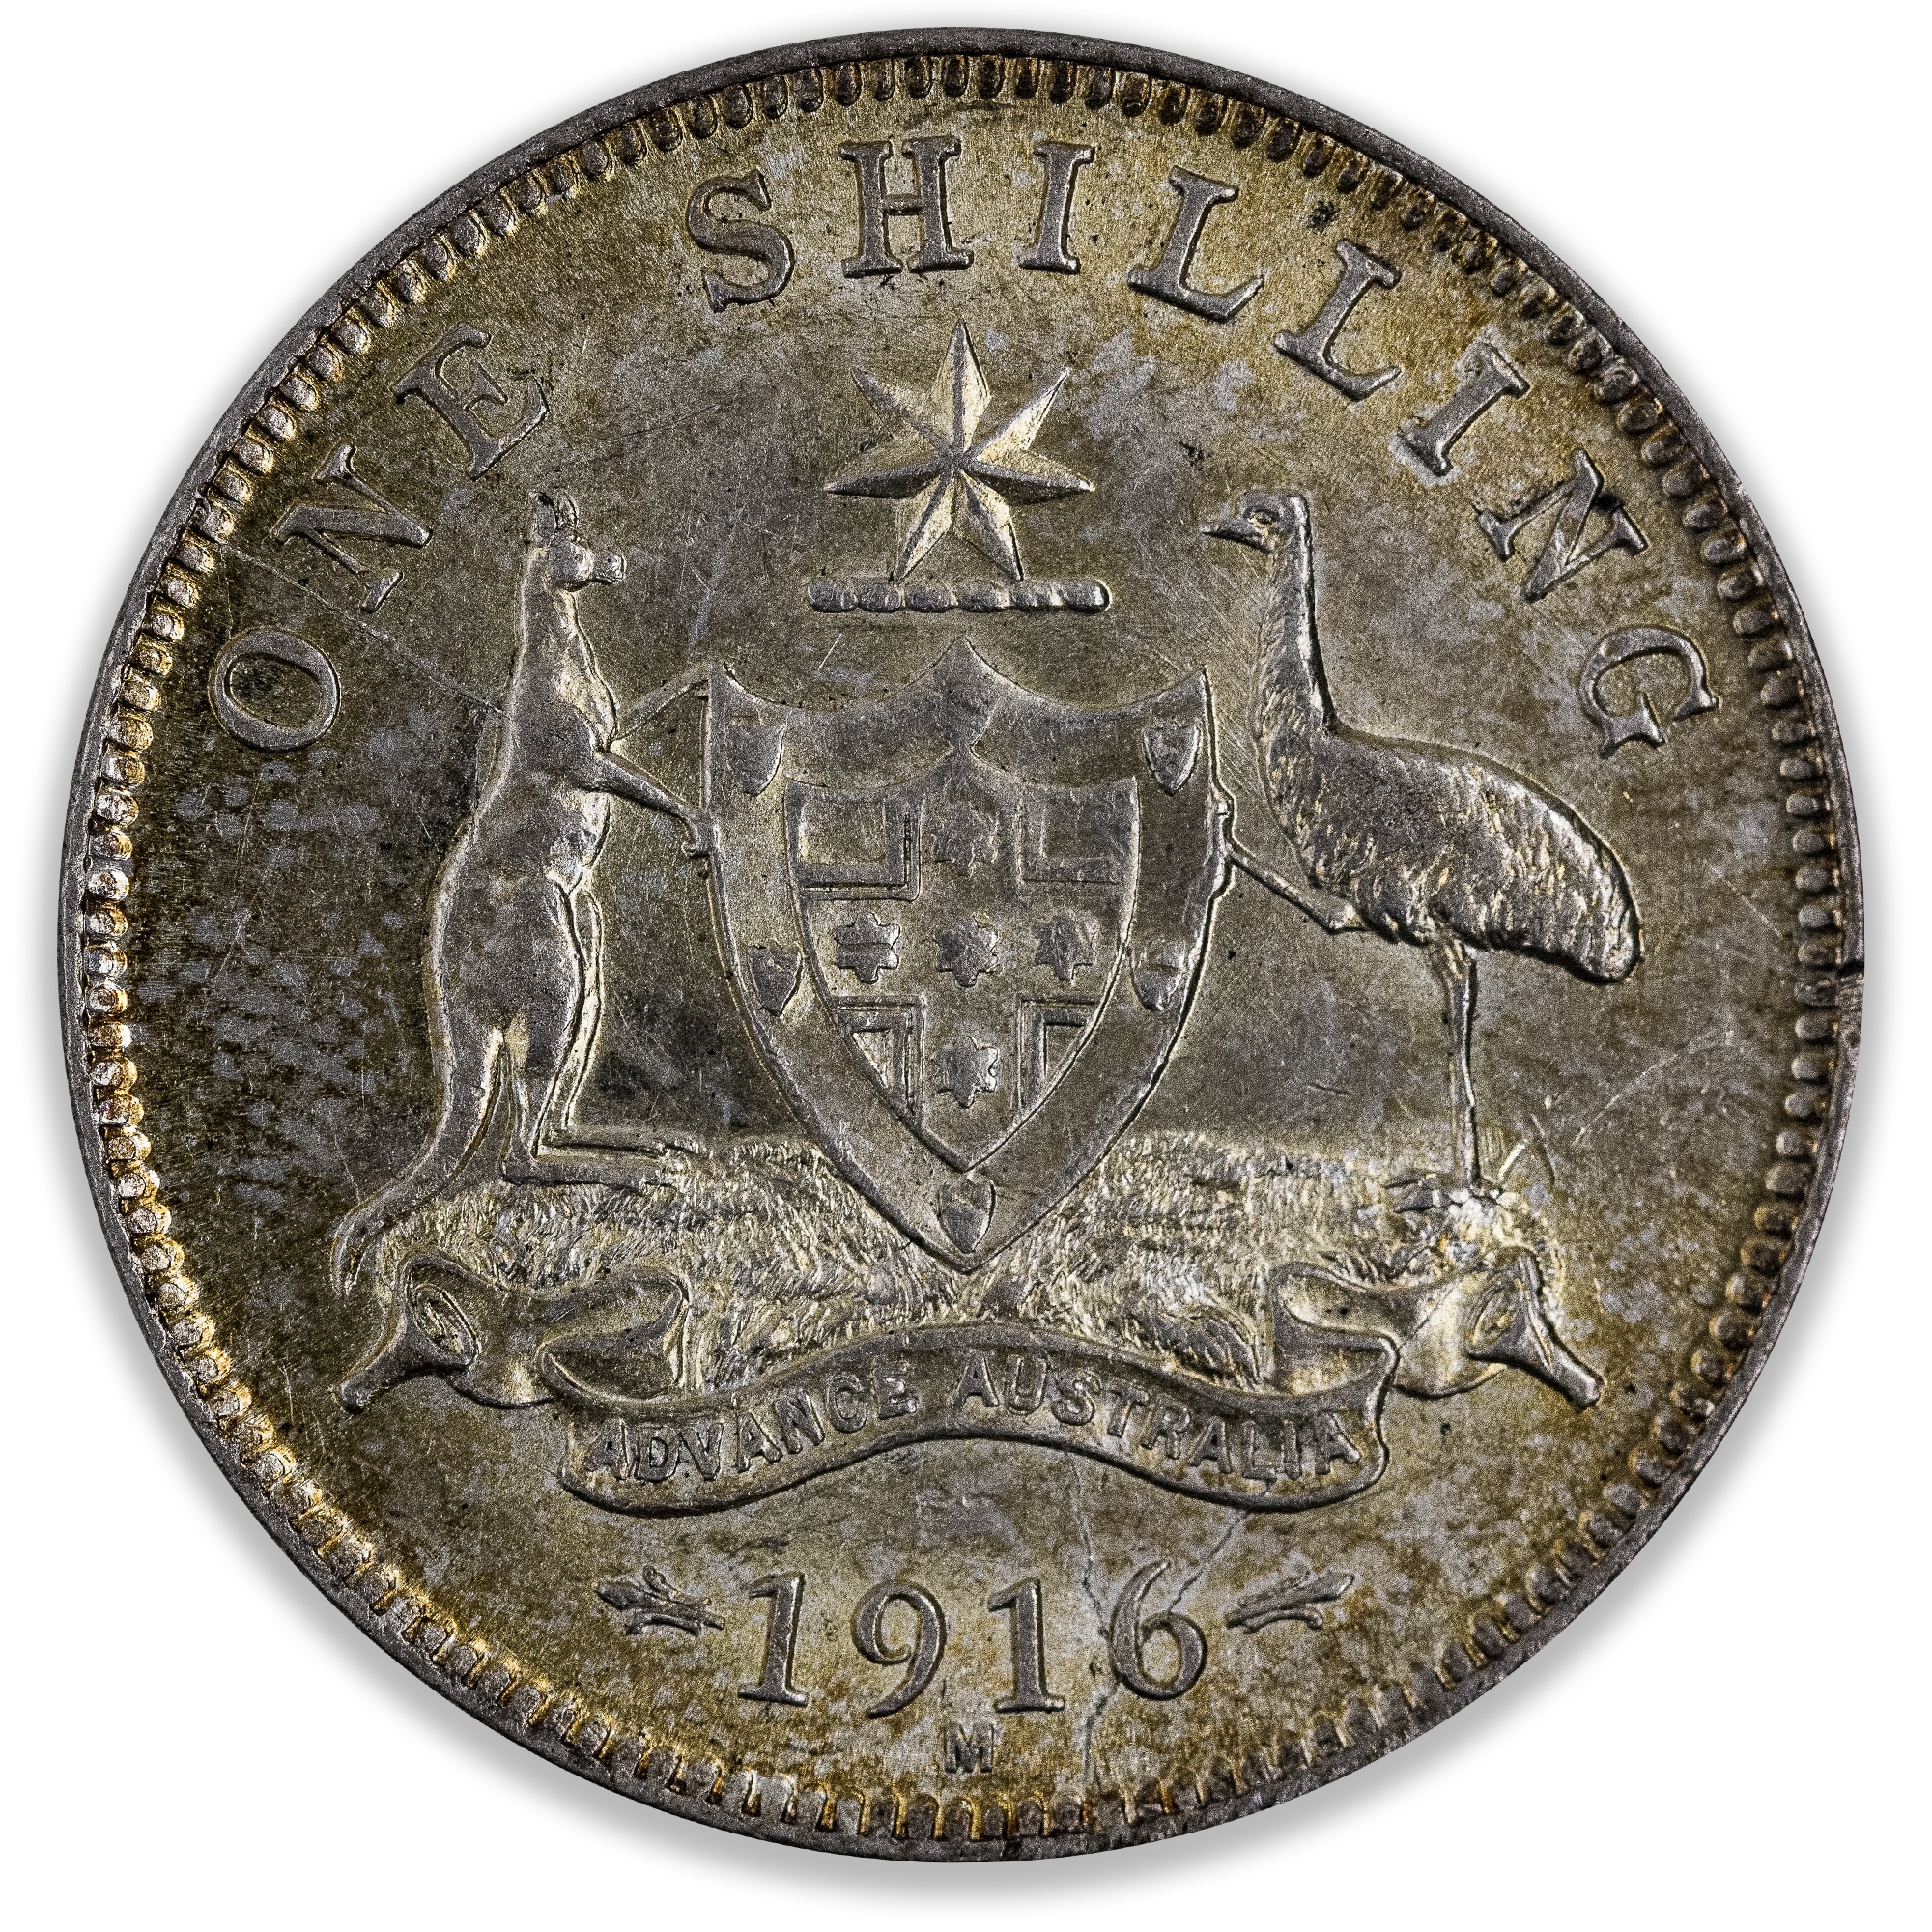 1916 Australian Shilling Good Extra Fine/About Uncirculated